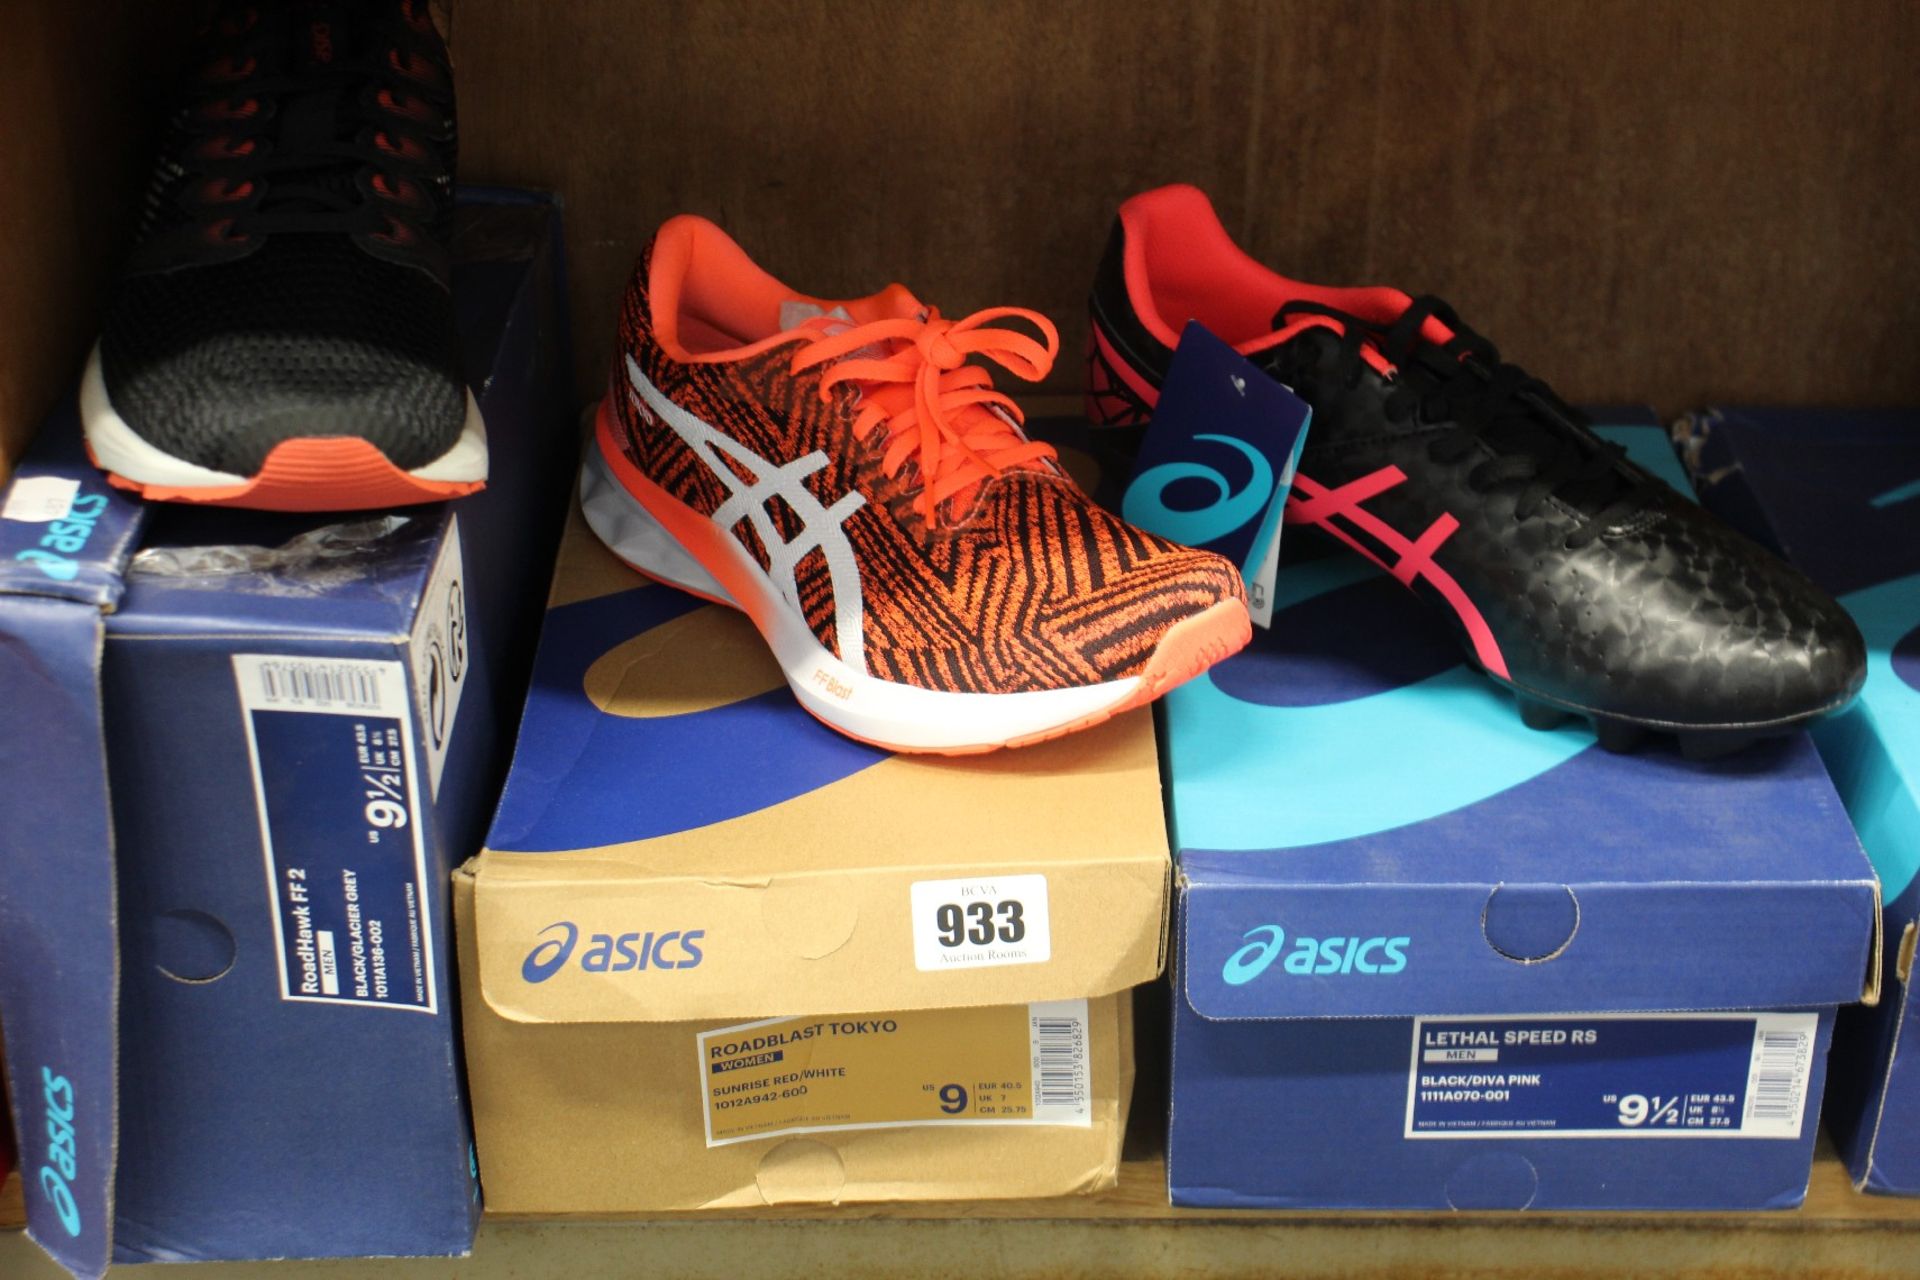 Three pairs of men's as new Asics trainers; RoadHawk FF 2 (UK 8.5), Leathal Speed RS (UK 8.5) and